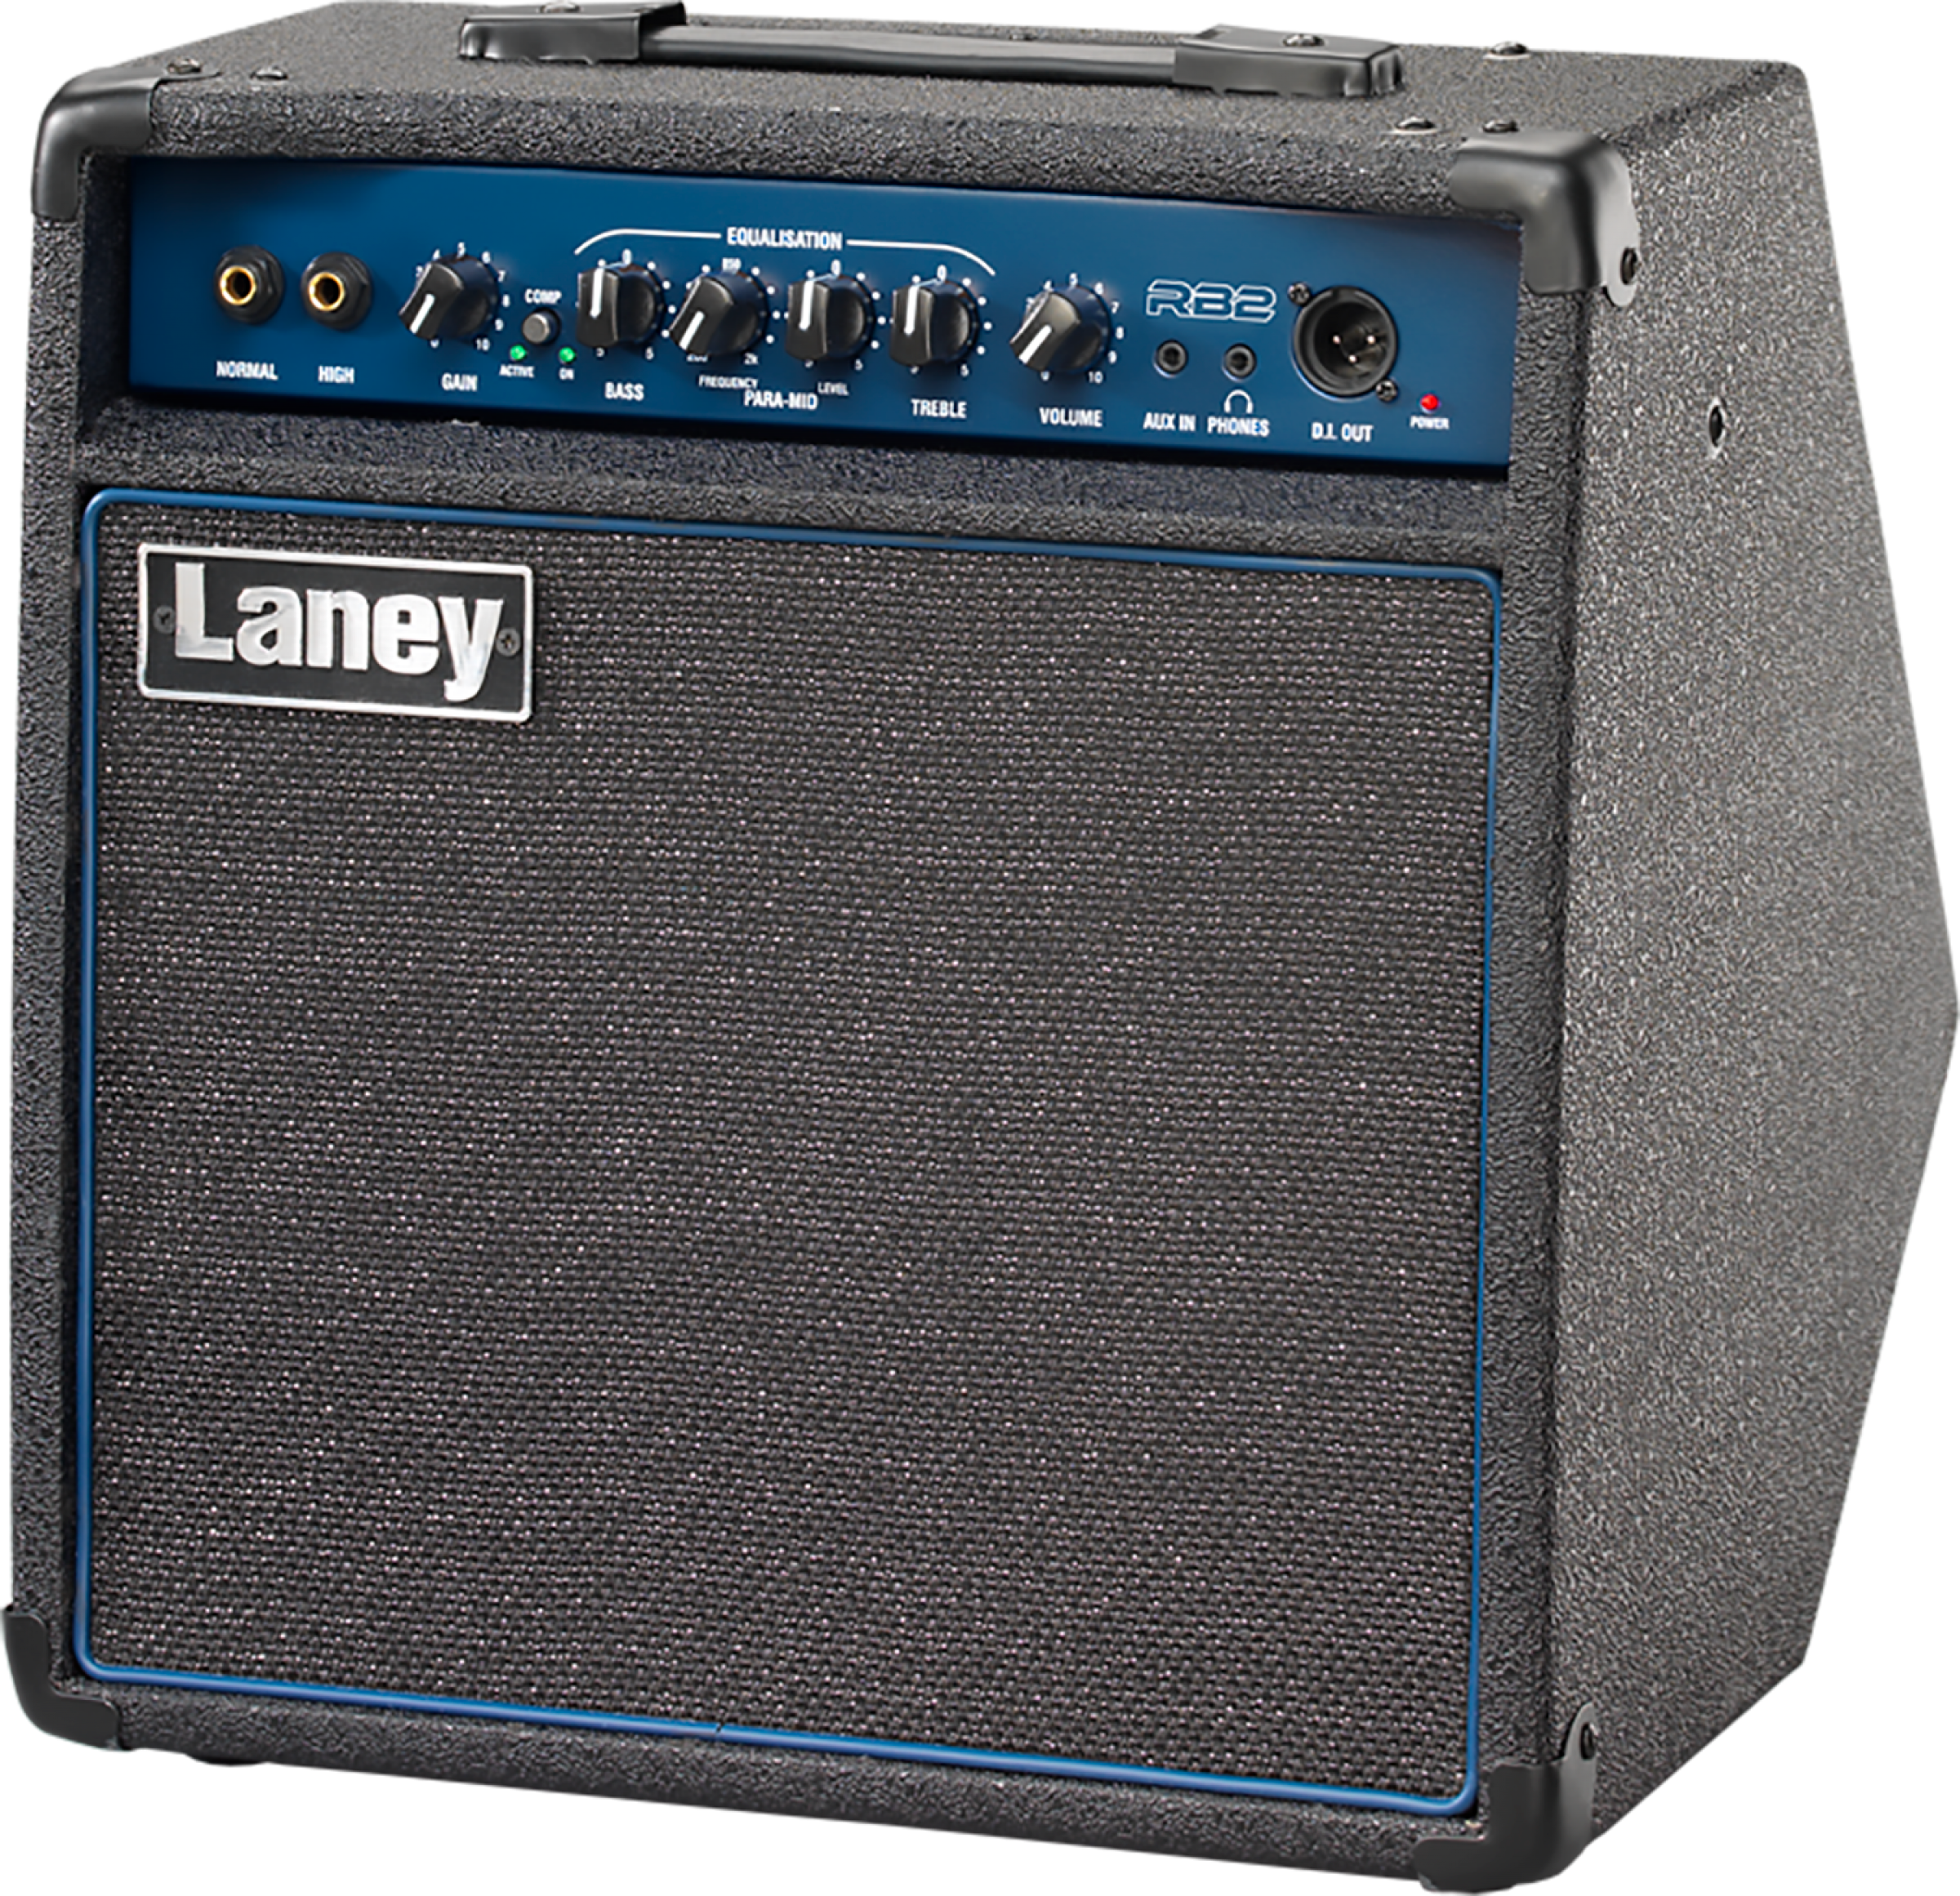 Laney Rb2 30w 1x10 - Bass combo amp - Variation 2